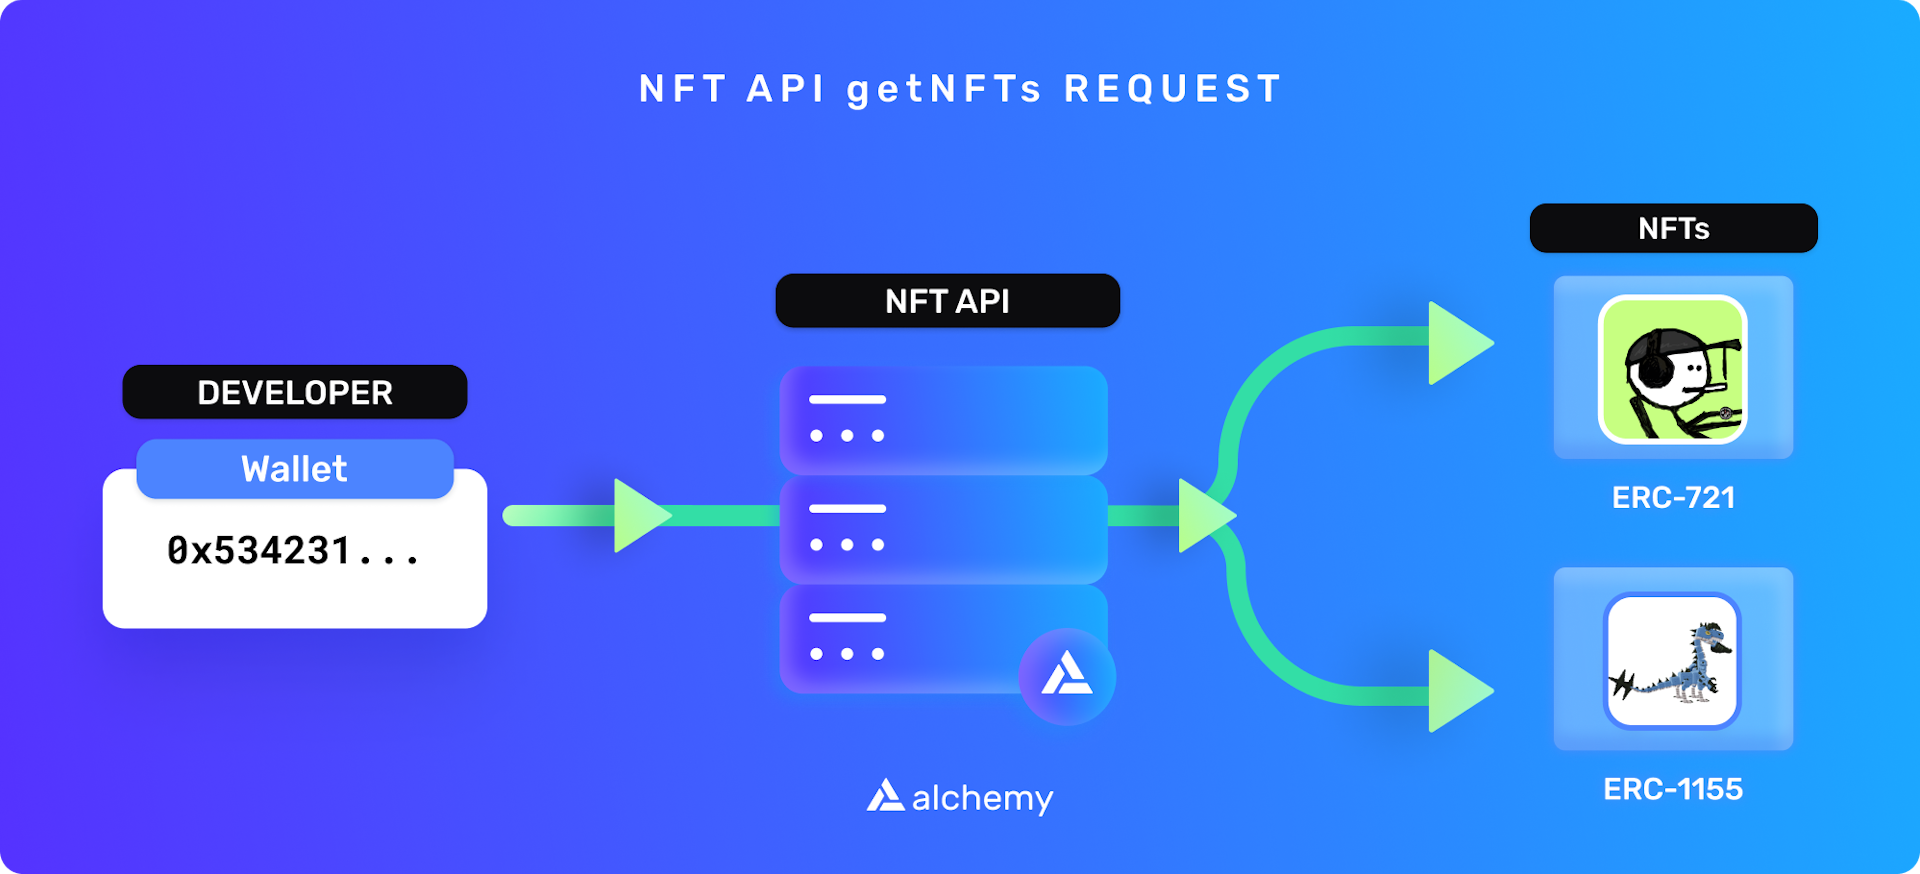 An example of the NFT API returning requested data, based on wallet address